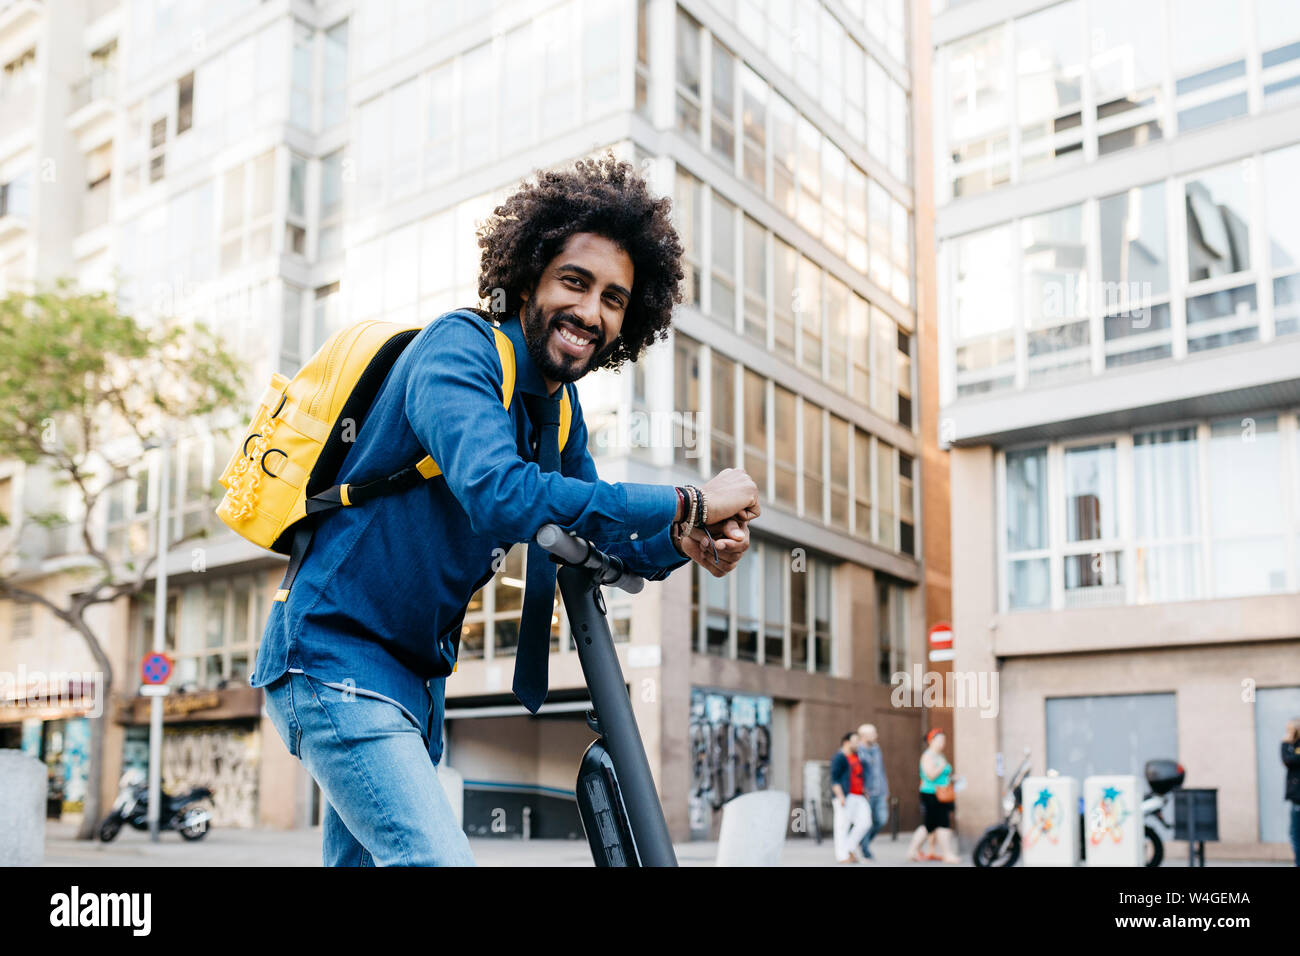 Portrait of smiling young man with yellow backpack on E-Scooter in the city, Barcelona, Spain Stock Photo